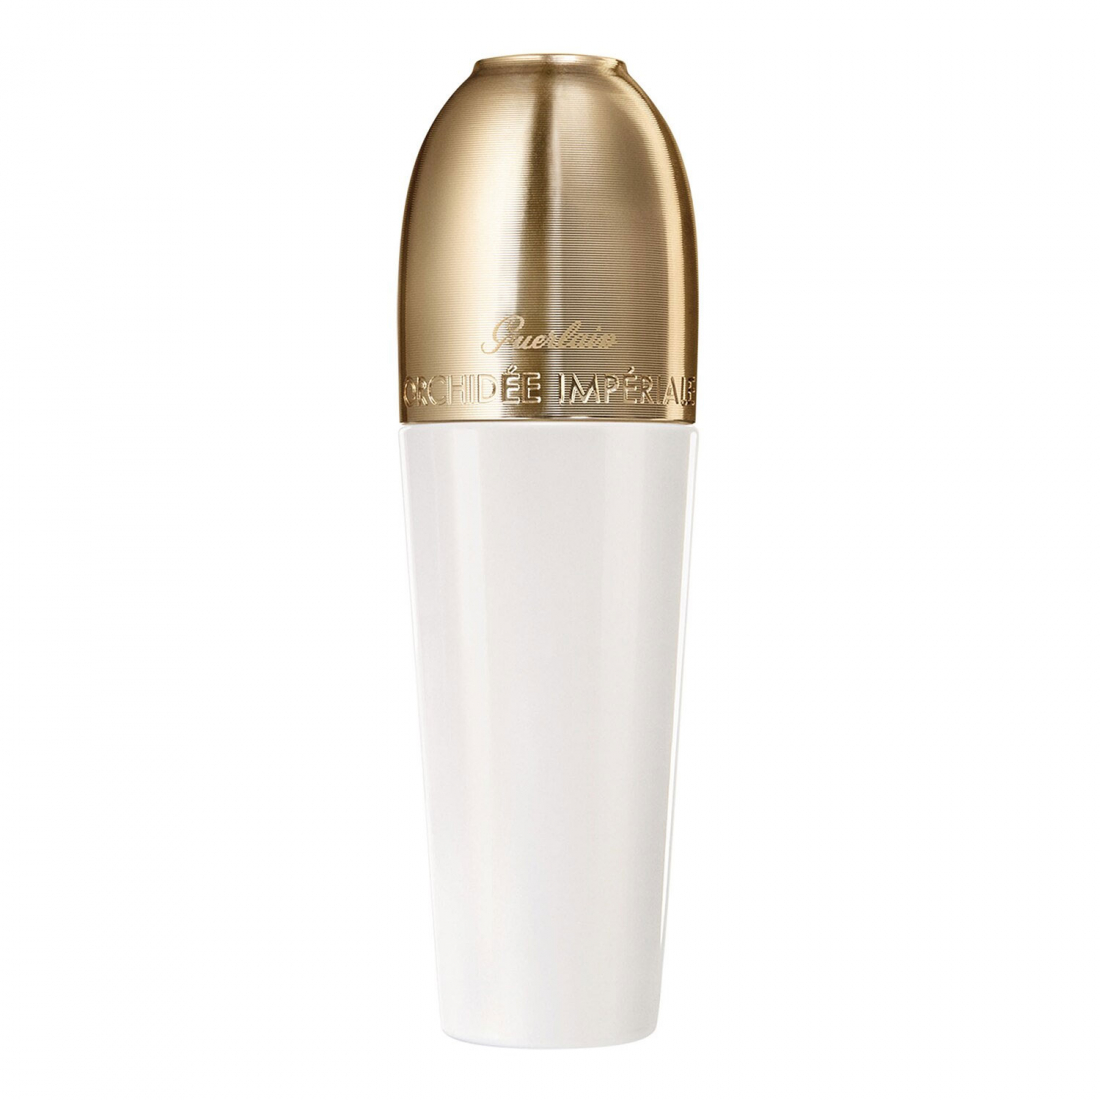 'Orchidée Impériale The Radiance' Eye serum - 15 ml